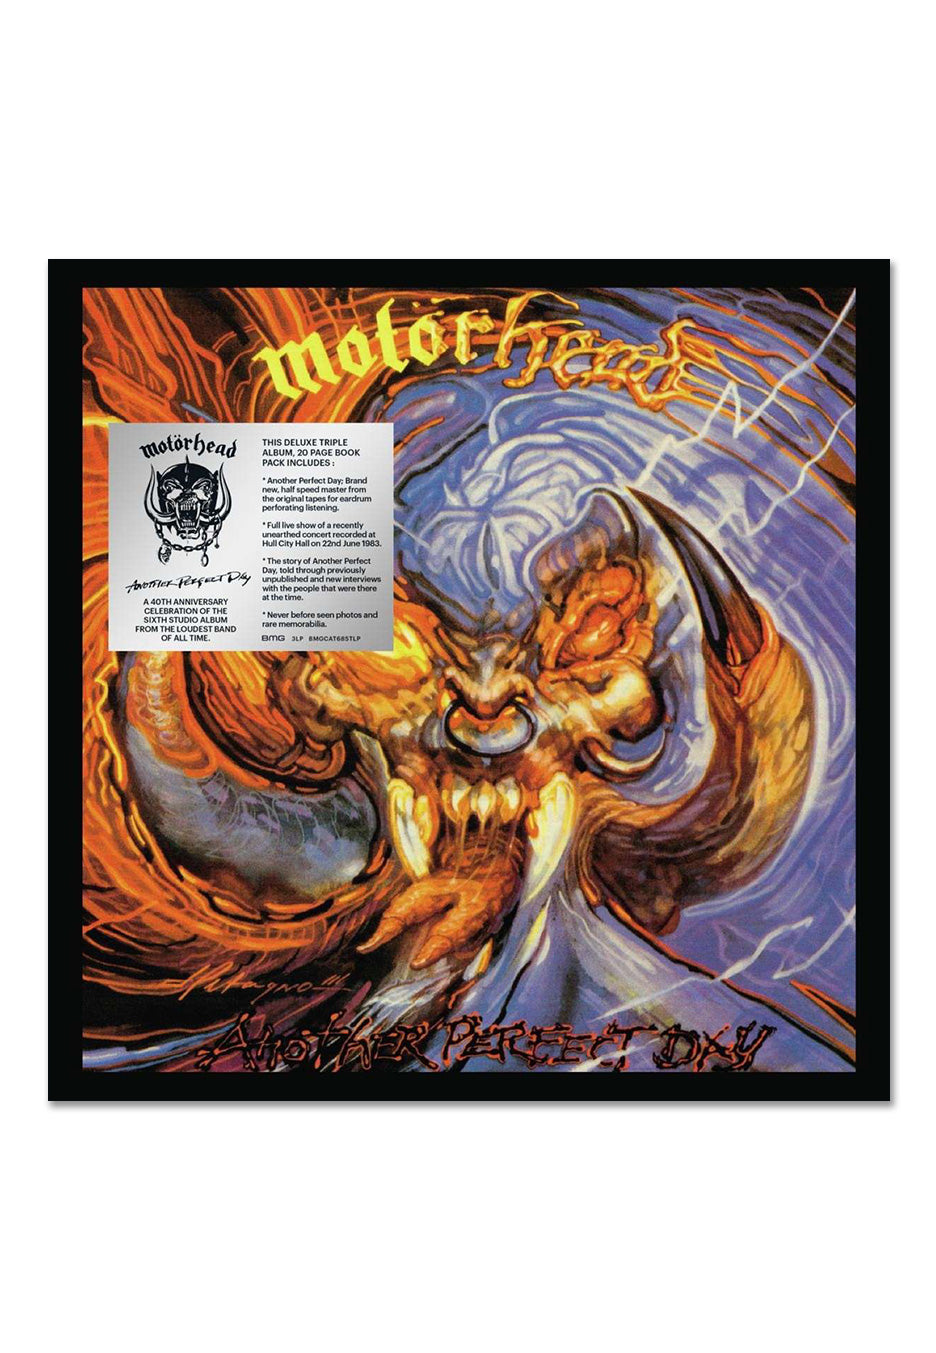 Motörhead - Another Perfect Day Orange w/ Yellow - Colored Vinyl